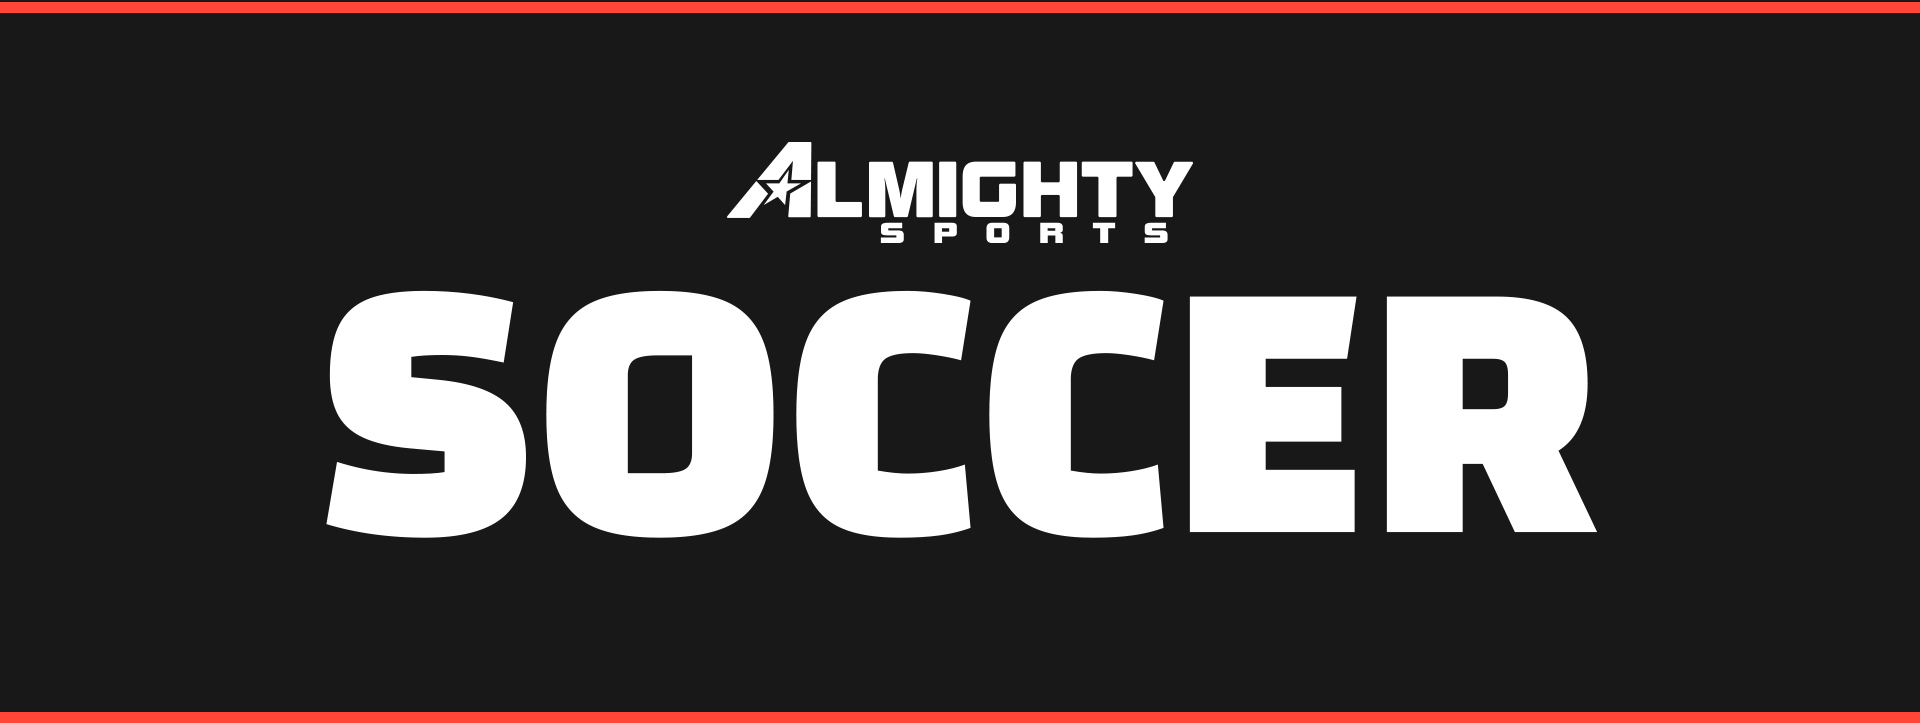 Web Banner: Almighty Soccer